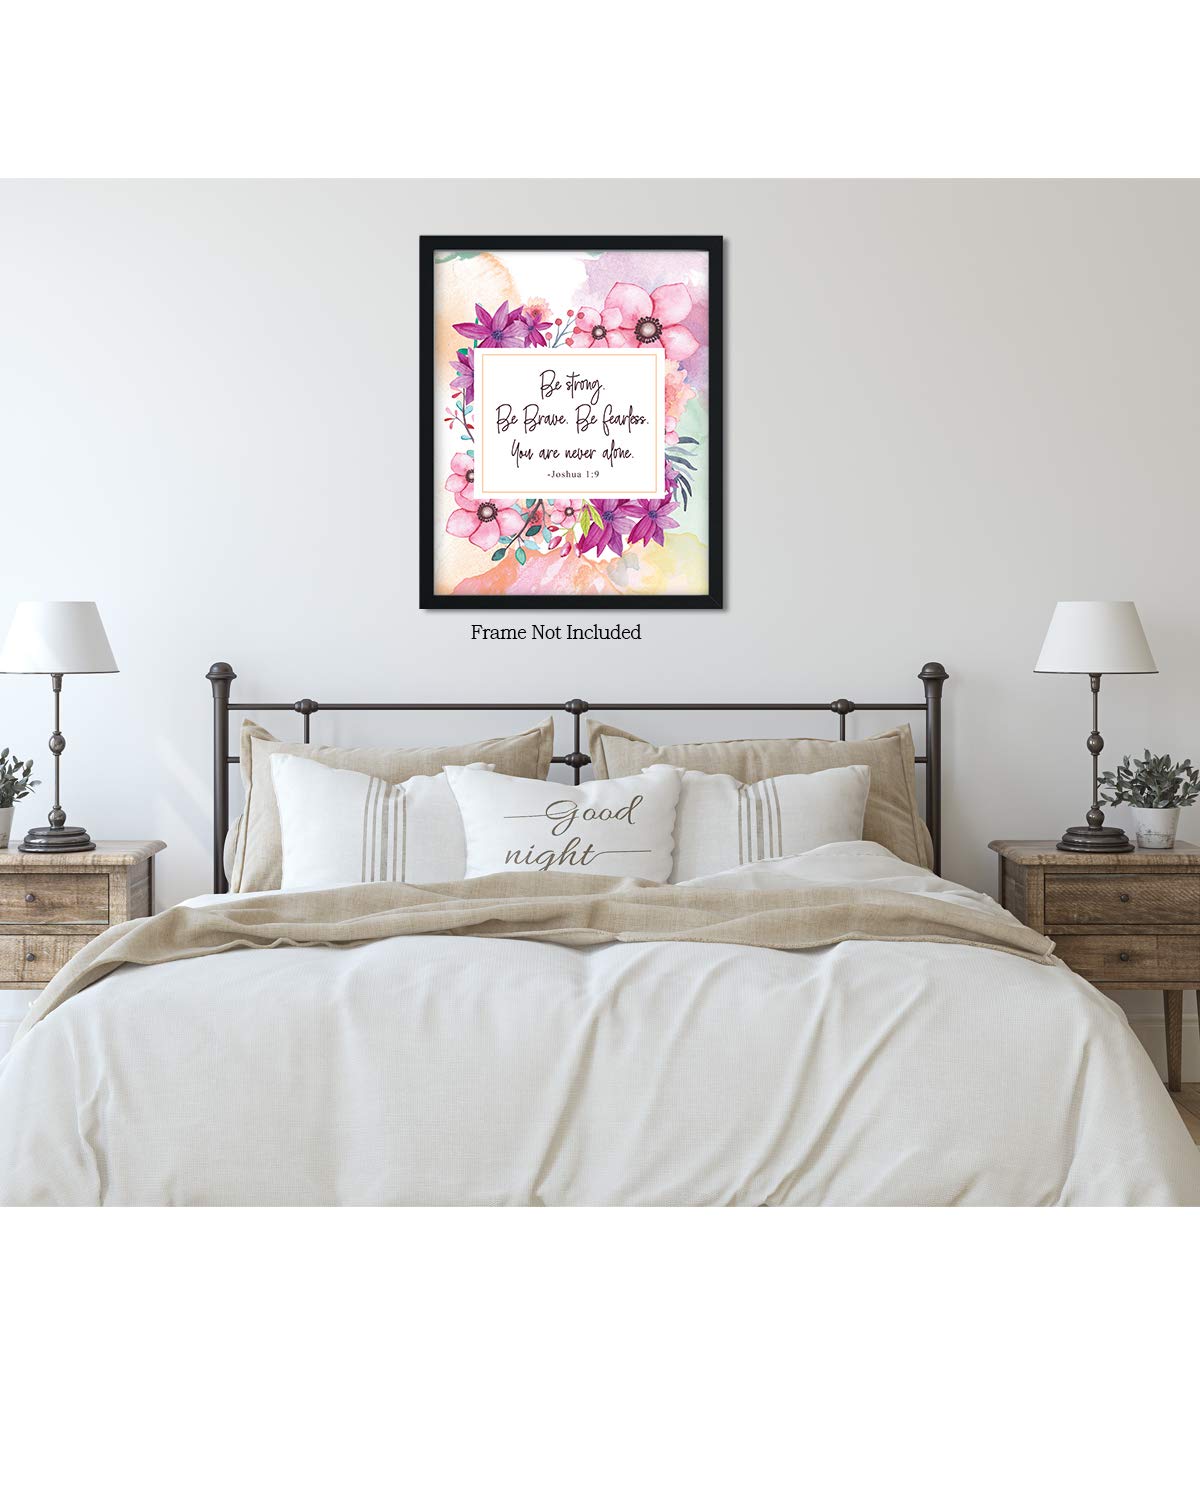 Be Strong. Be Brave. Be Fearless - Christian Wall Art Decor Print